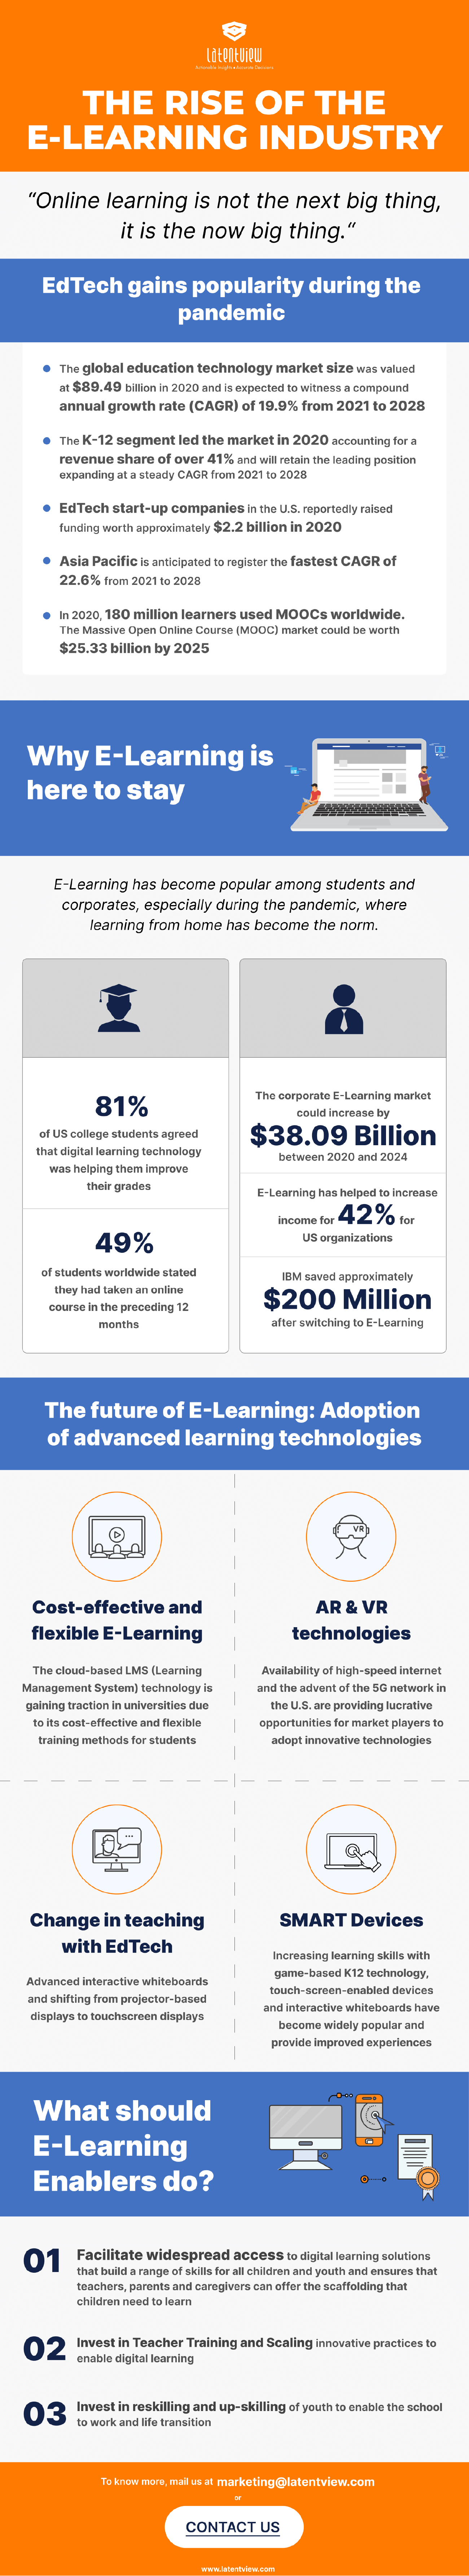 The Rise of the E Learning Industry infographic